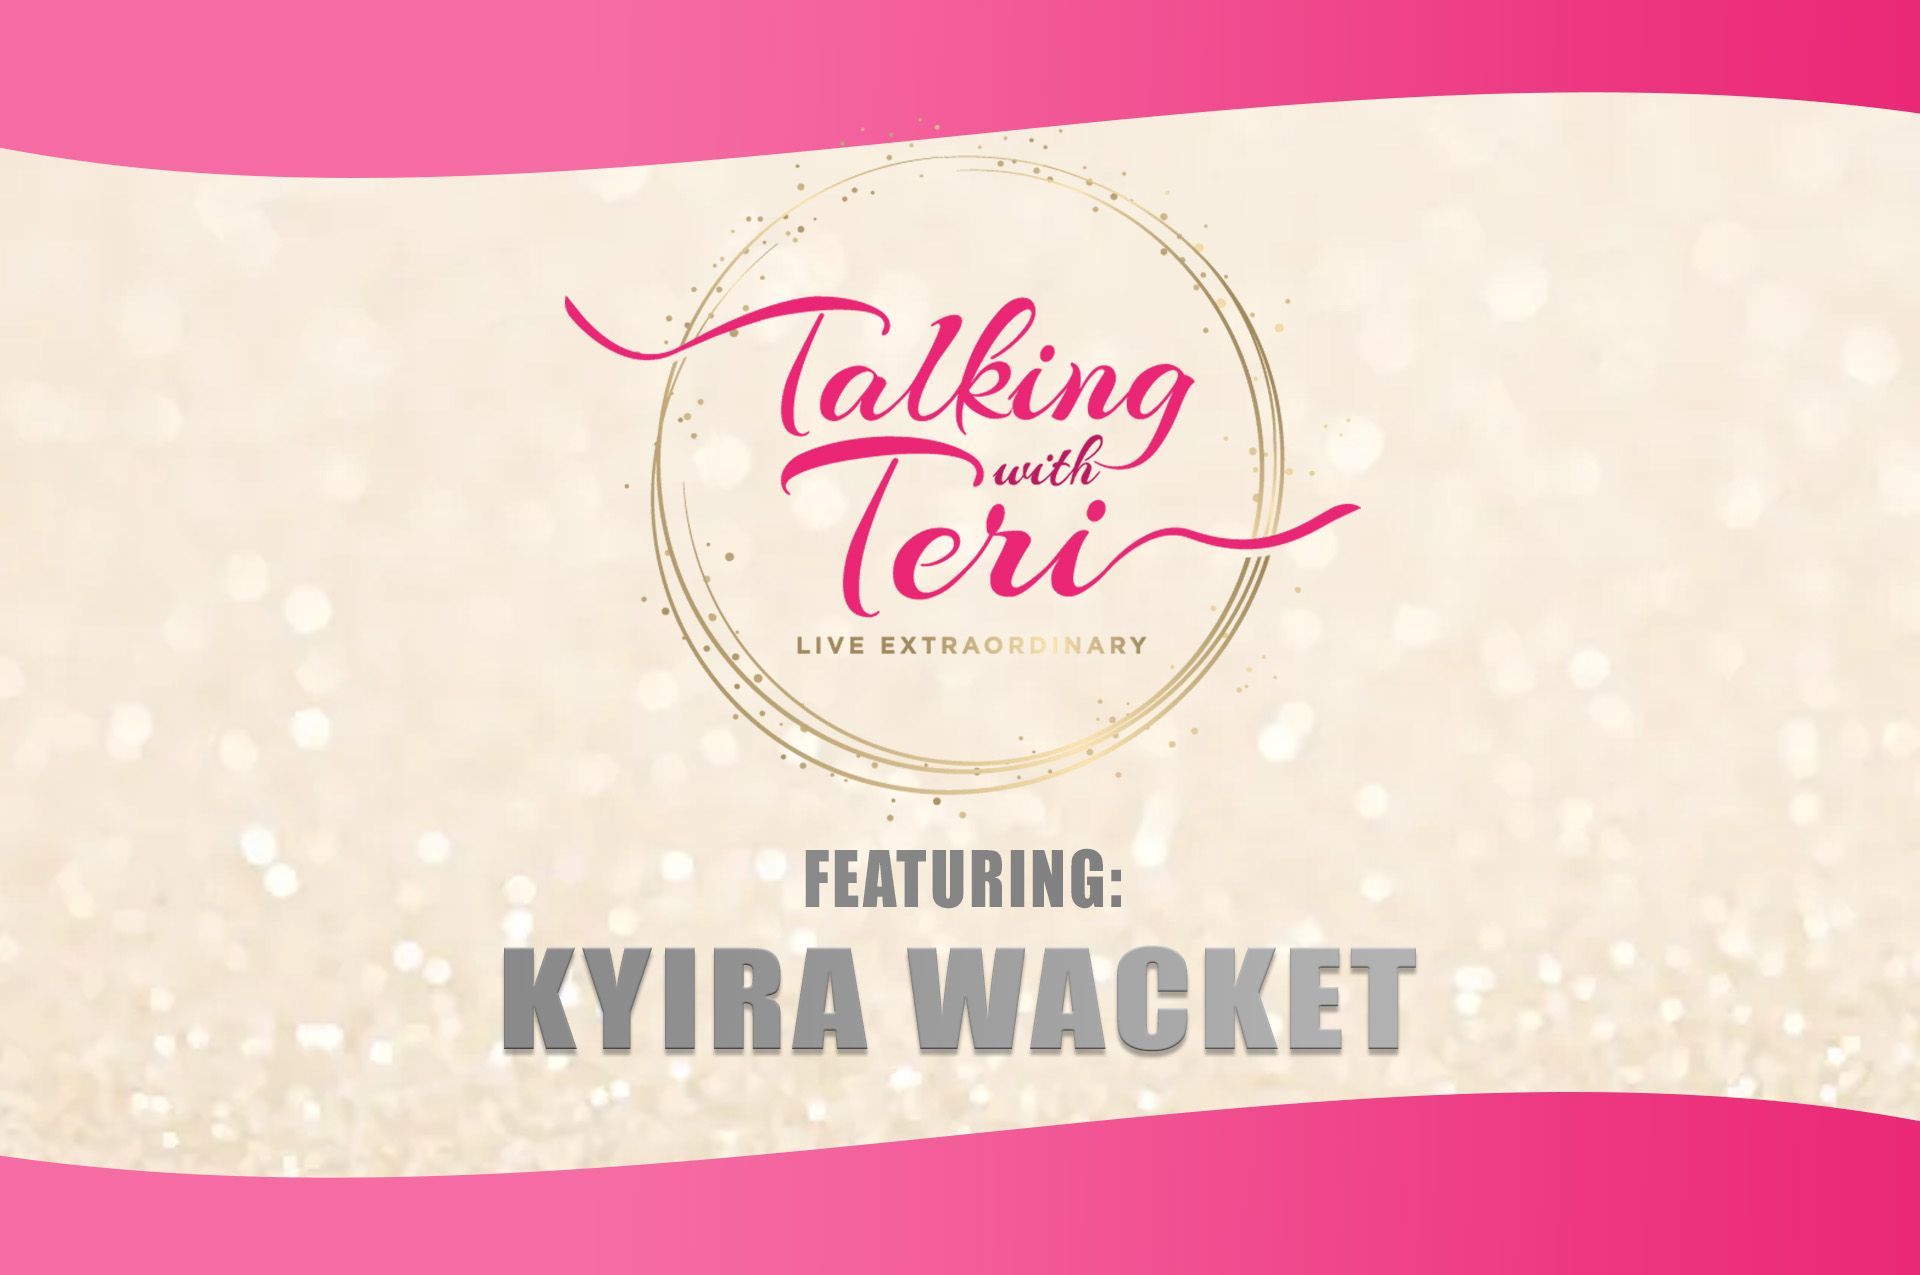 Episode 156 Navigating Life with Resilience featuring Kyira Wacket